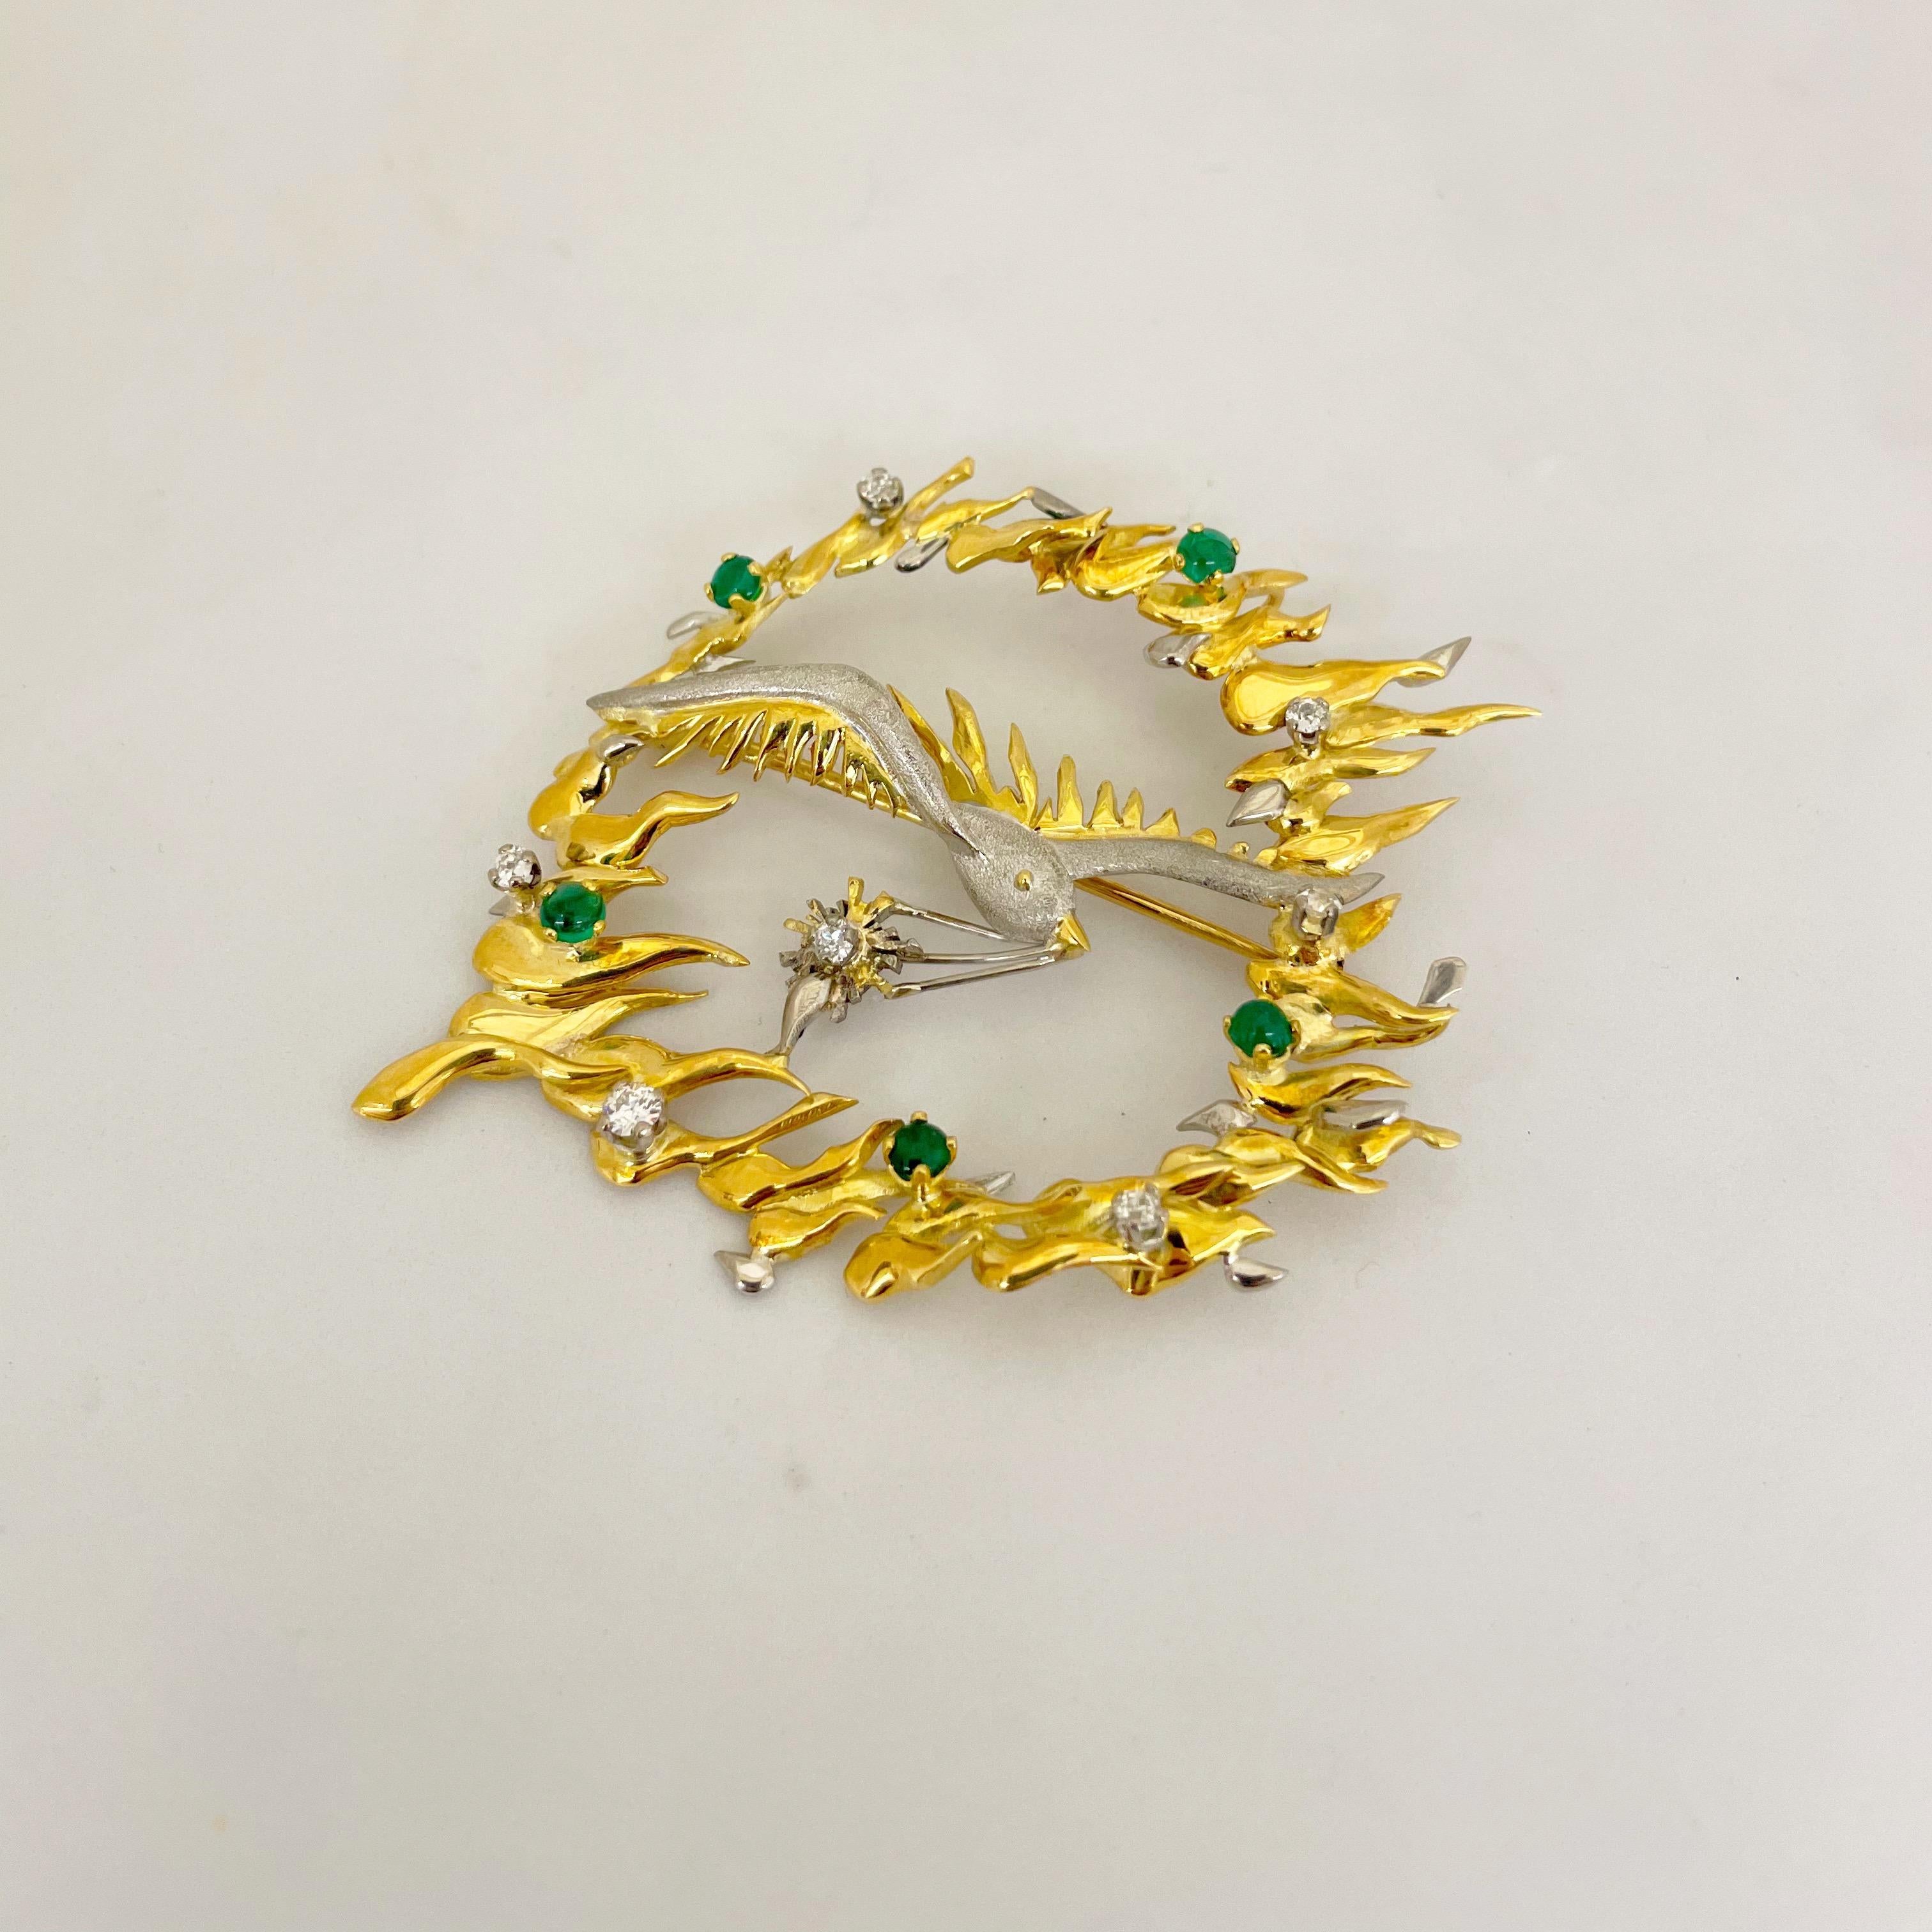 Vintage 18 karat gold brooch. The brooch is designed with a bird motif in a white gold matte finish, with shiny yellow gold for the feathers. The bird sits in a ring of fire which has been accented with round brilliant diamonds and cabochon emeralds